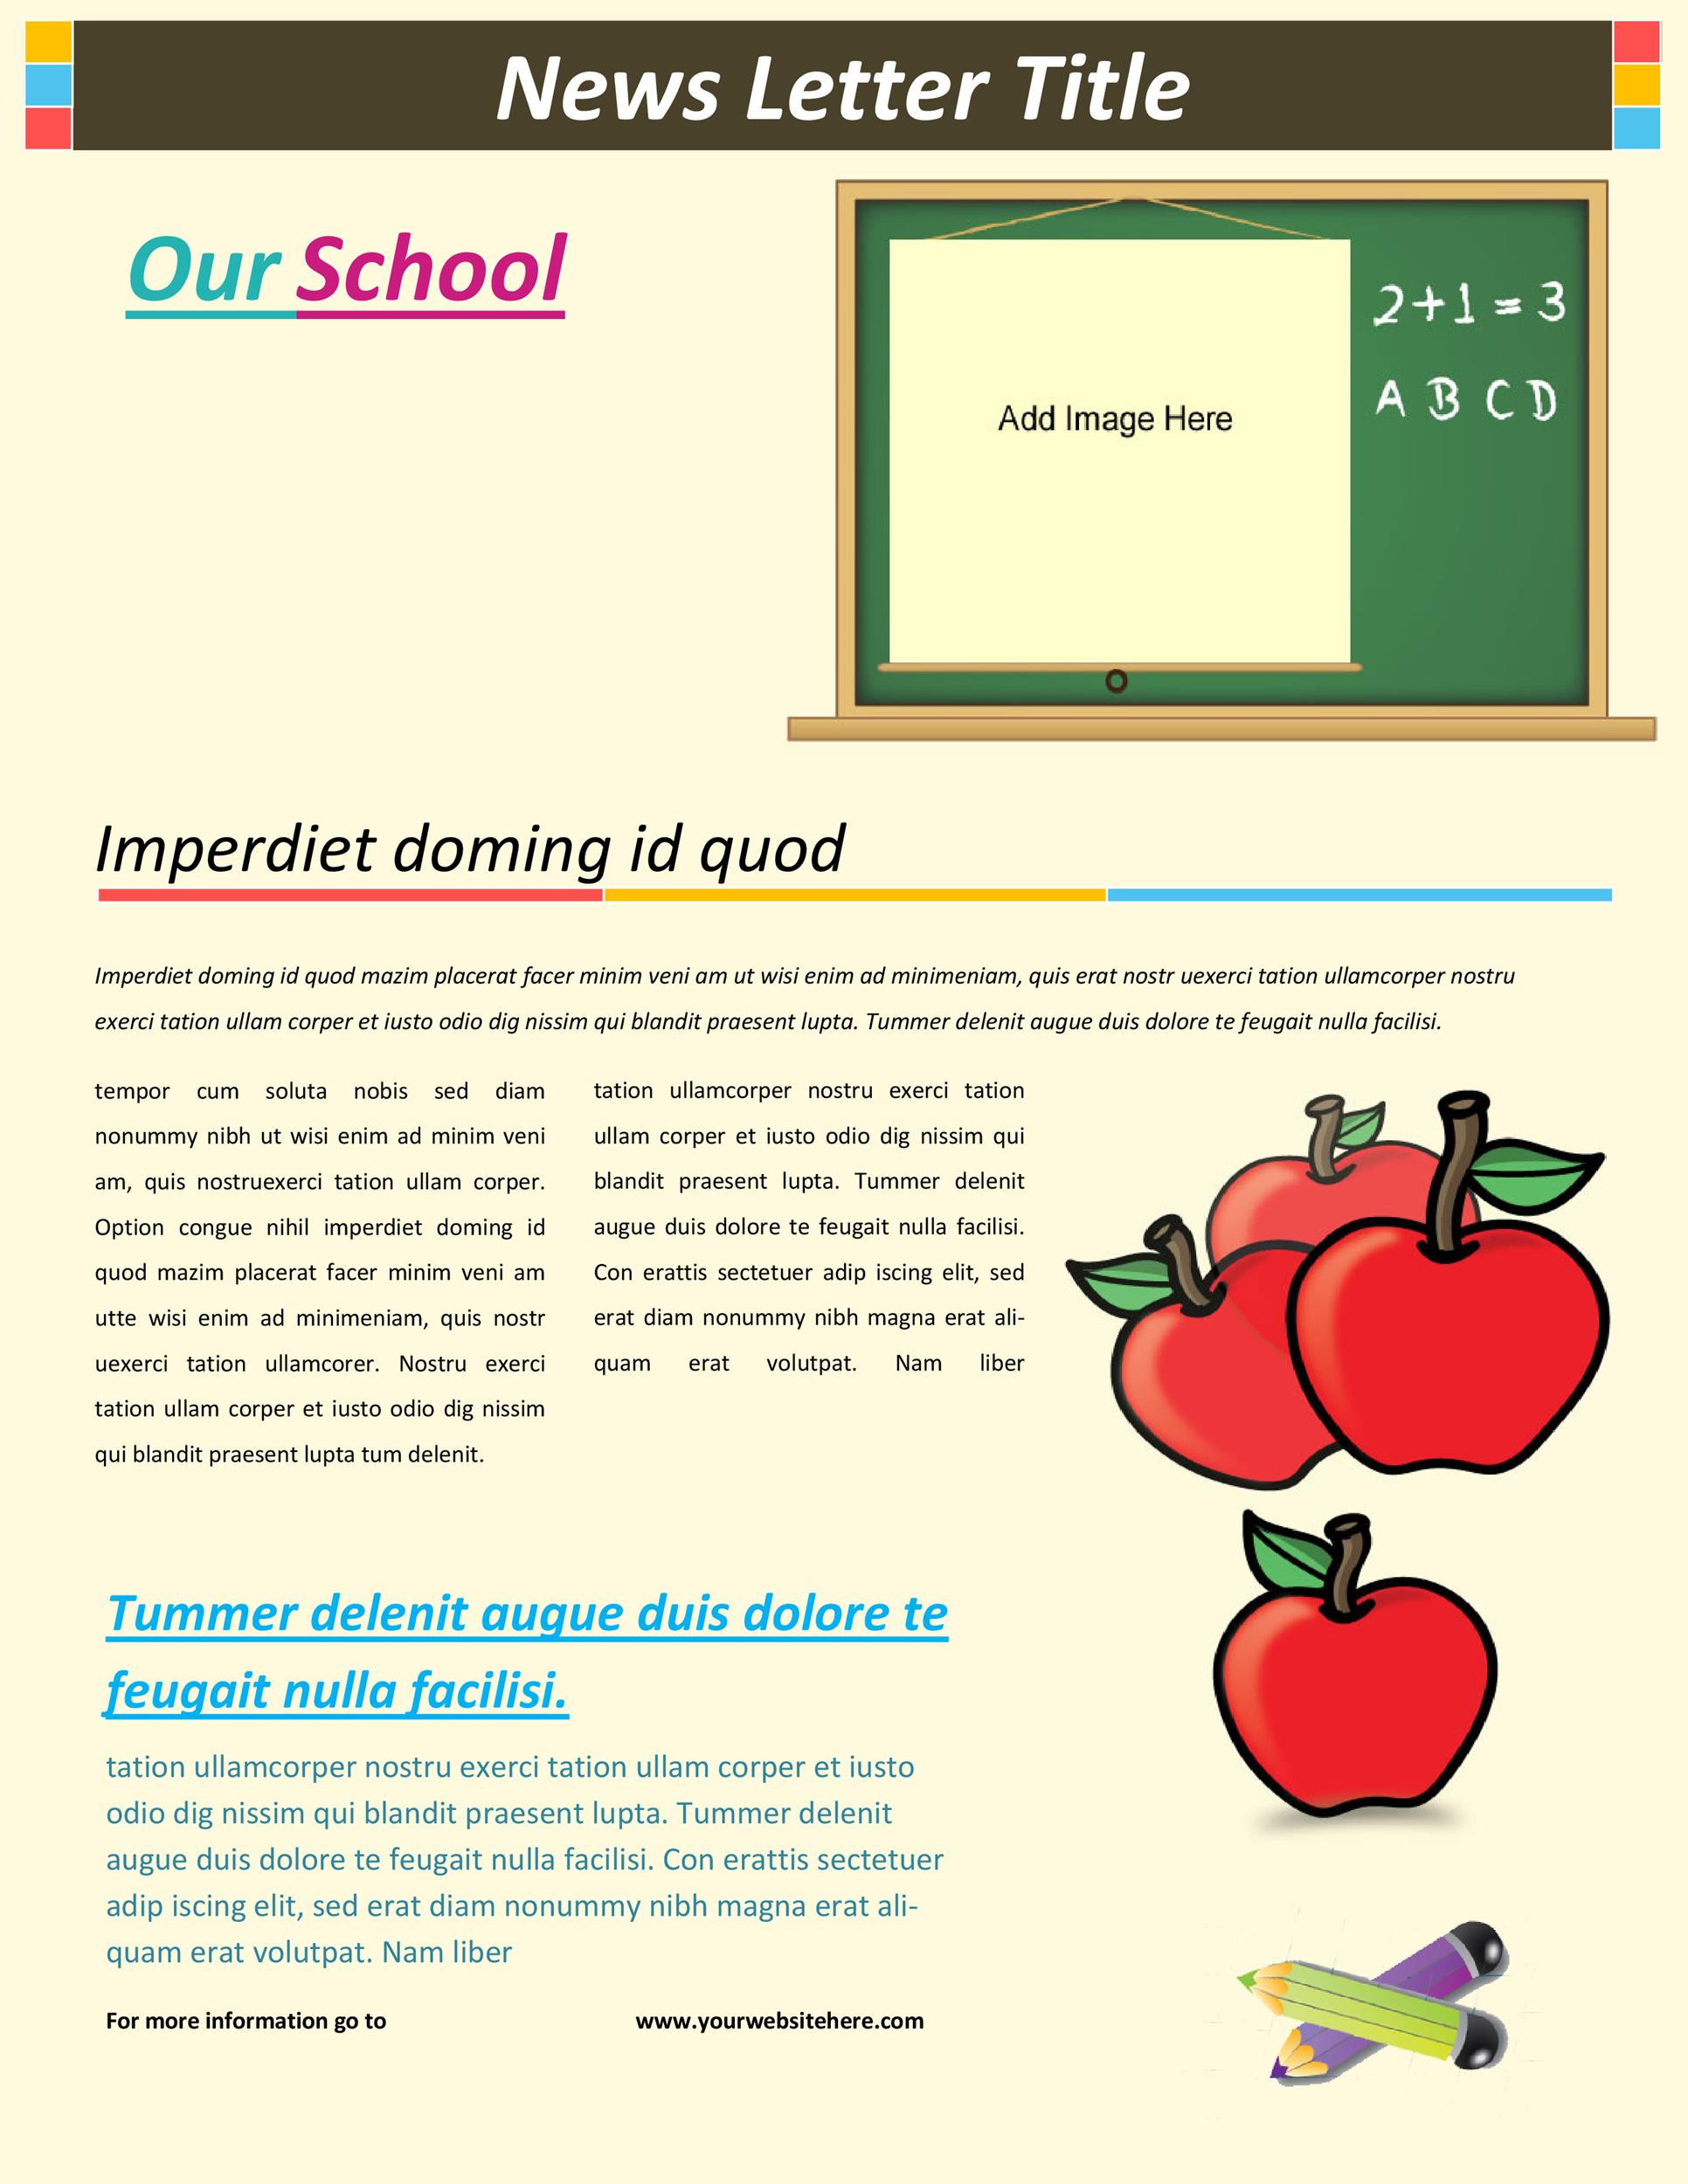 Print Newsletter Template Free 50 Free Newsletter Templates for Work School and Classroom